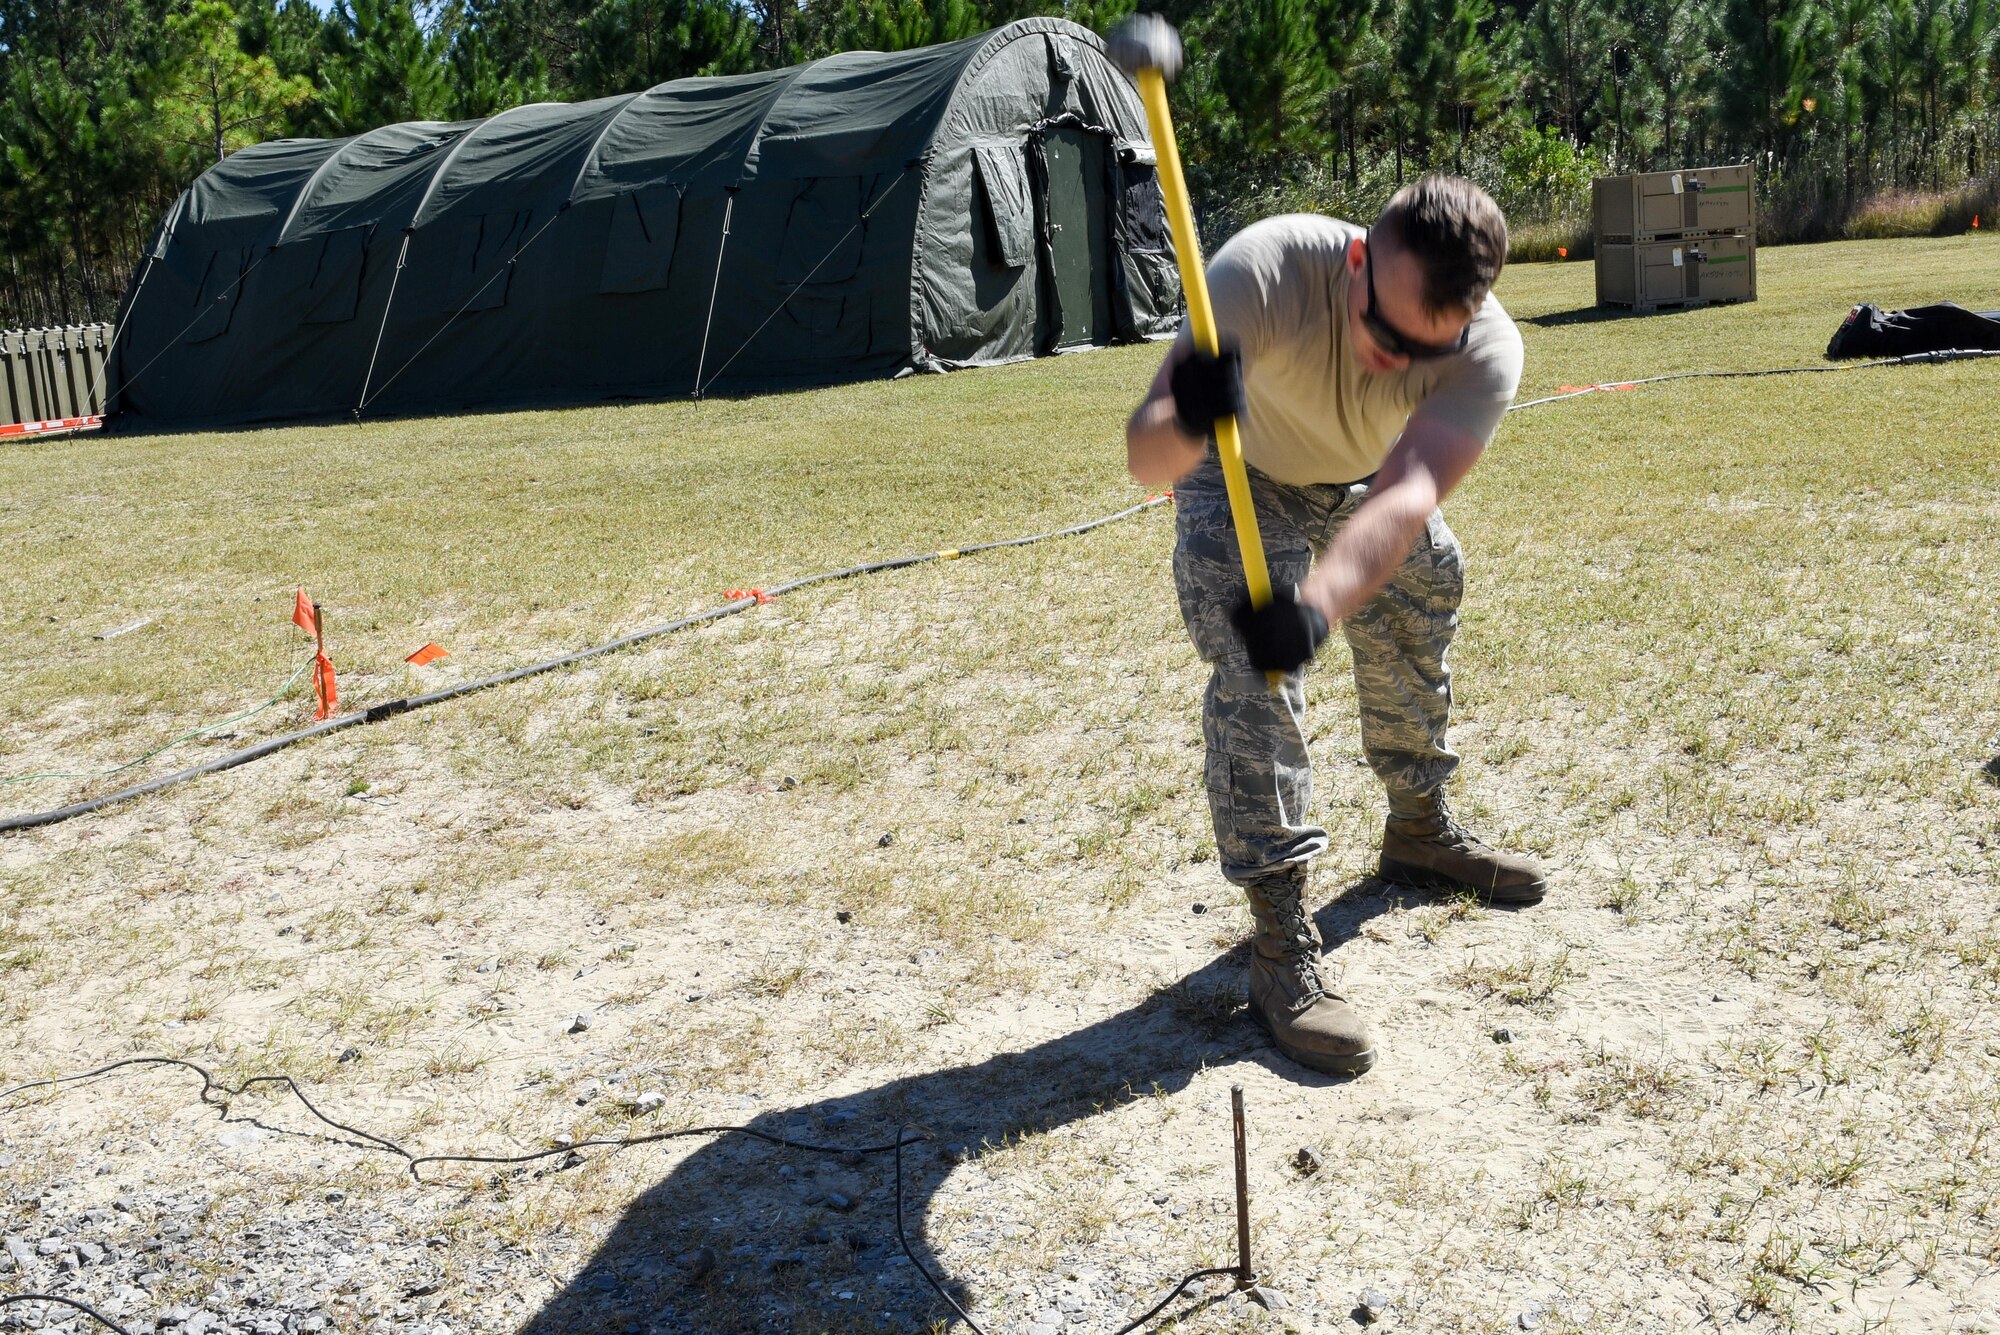 An Air Commando with the 1st Special Operations Civil Engineer Squadron, hammers a grounding rod in the ground during the construction of a Joint Special Operations Air Detachment at the Gulfport-Biloxi International Airport in Gulfport, Miss., Oct. 22, 2016. The 1st Special Operations Wing is participating in Exercise Southern Strike to practice tactical skills and test the capabilities of its Airmen and assets in a deployed environment. (U.S. Air Force photo by Senior Airman Jeff Parkinson)